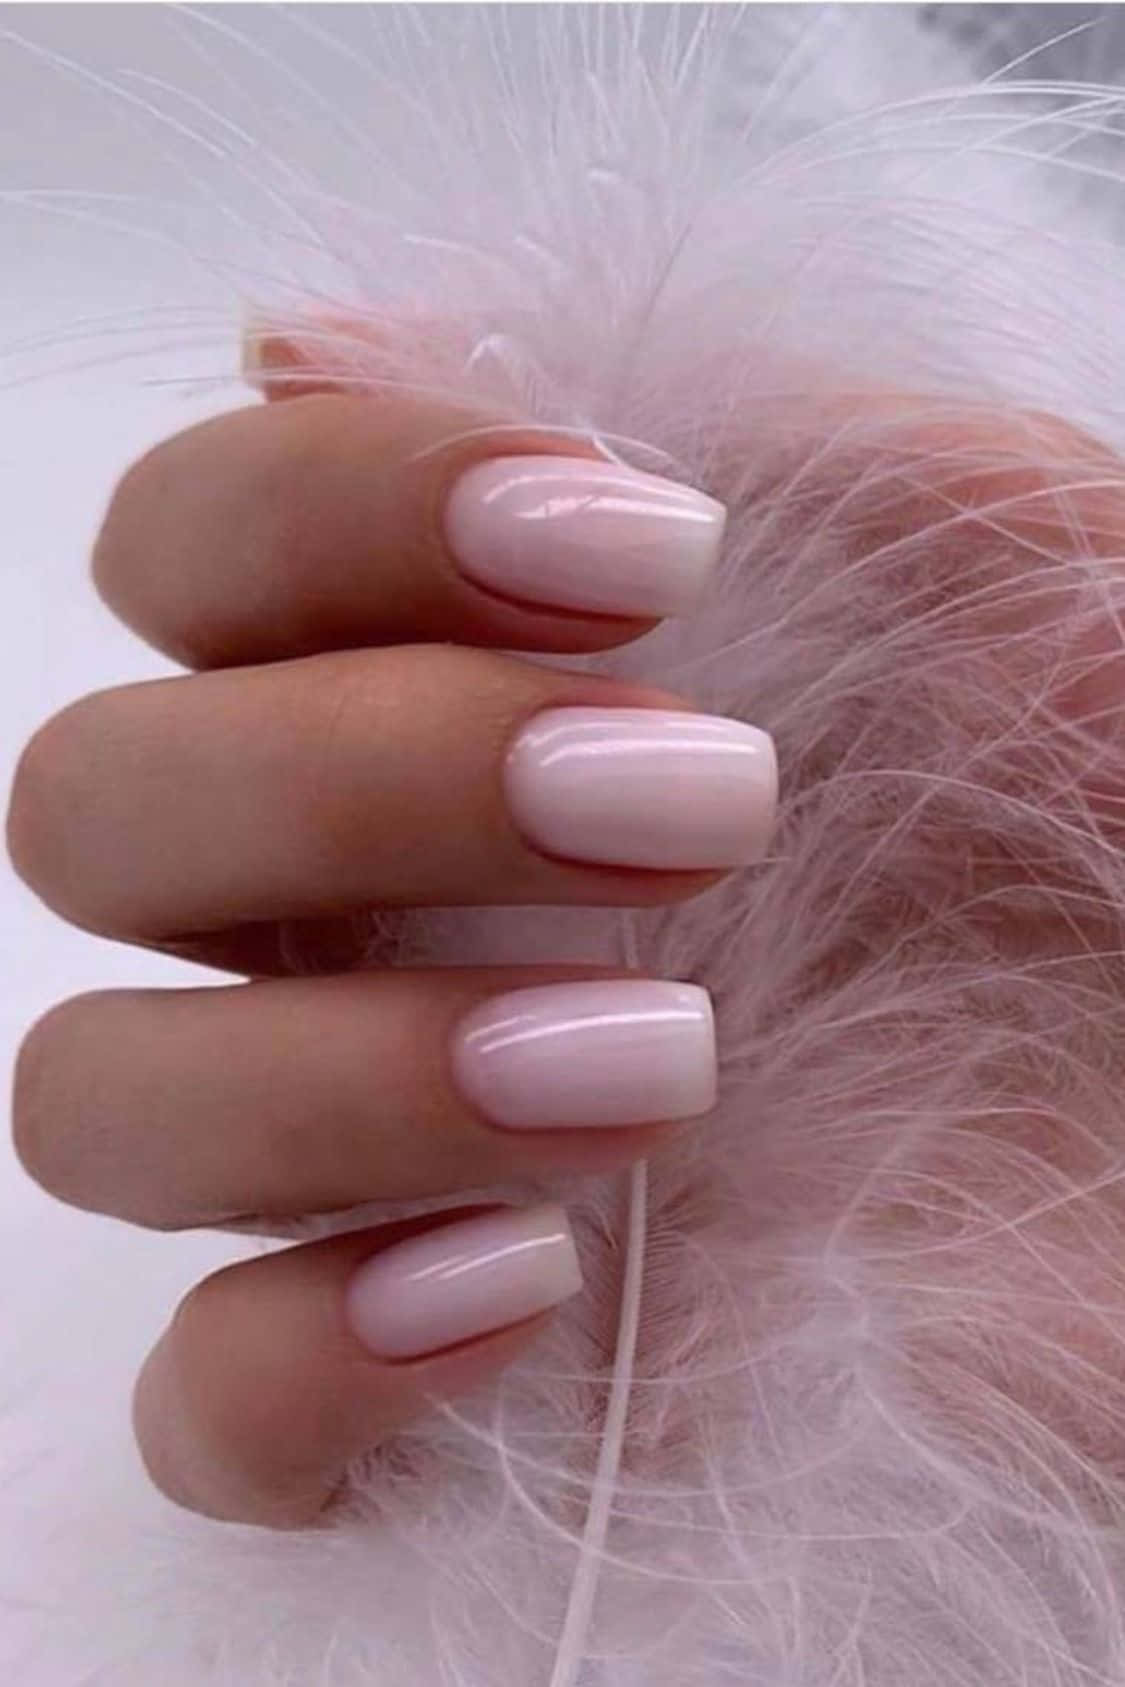 Get salon-style acrylic nails that are sure to make you shine! Wallpaper